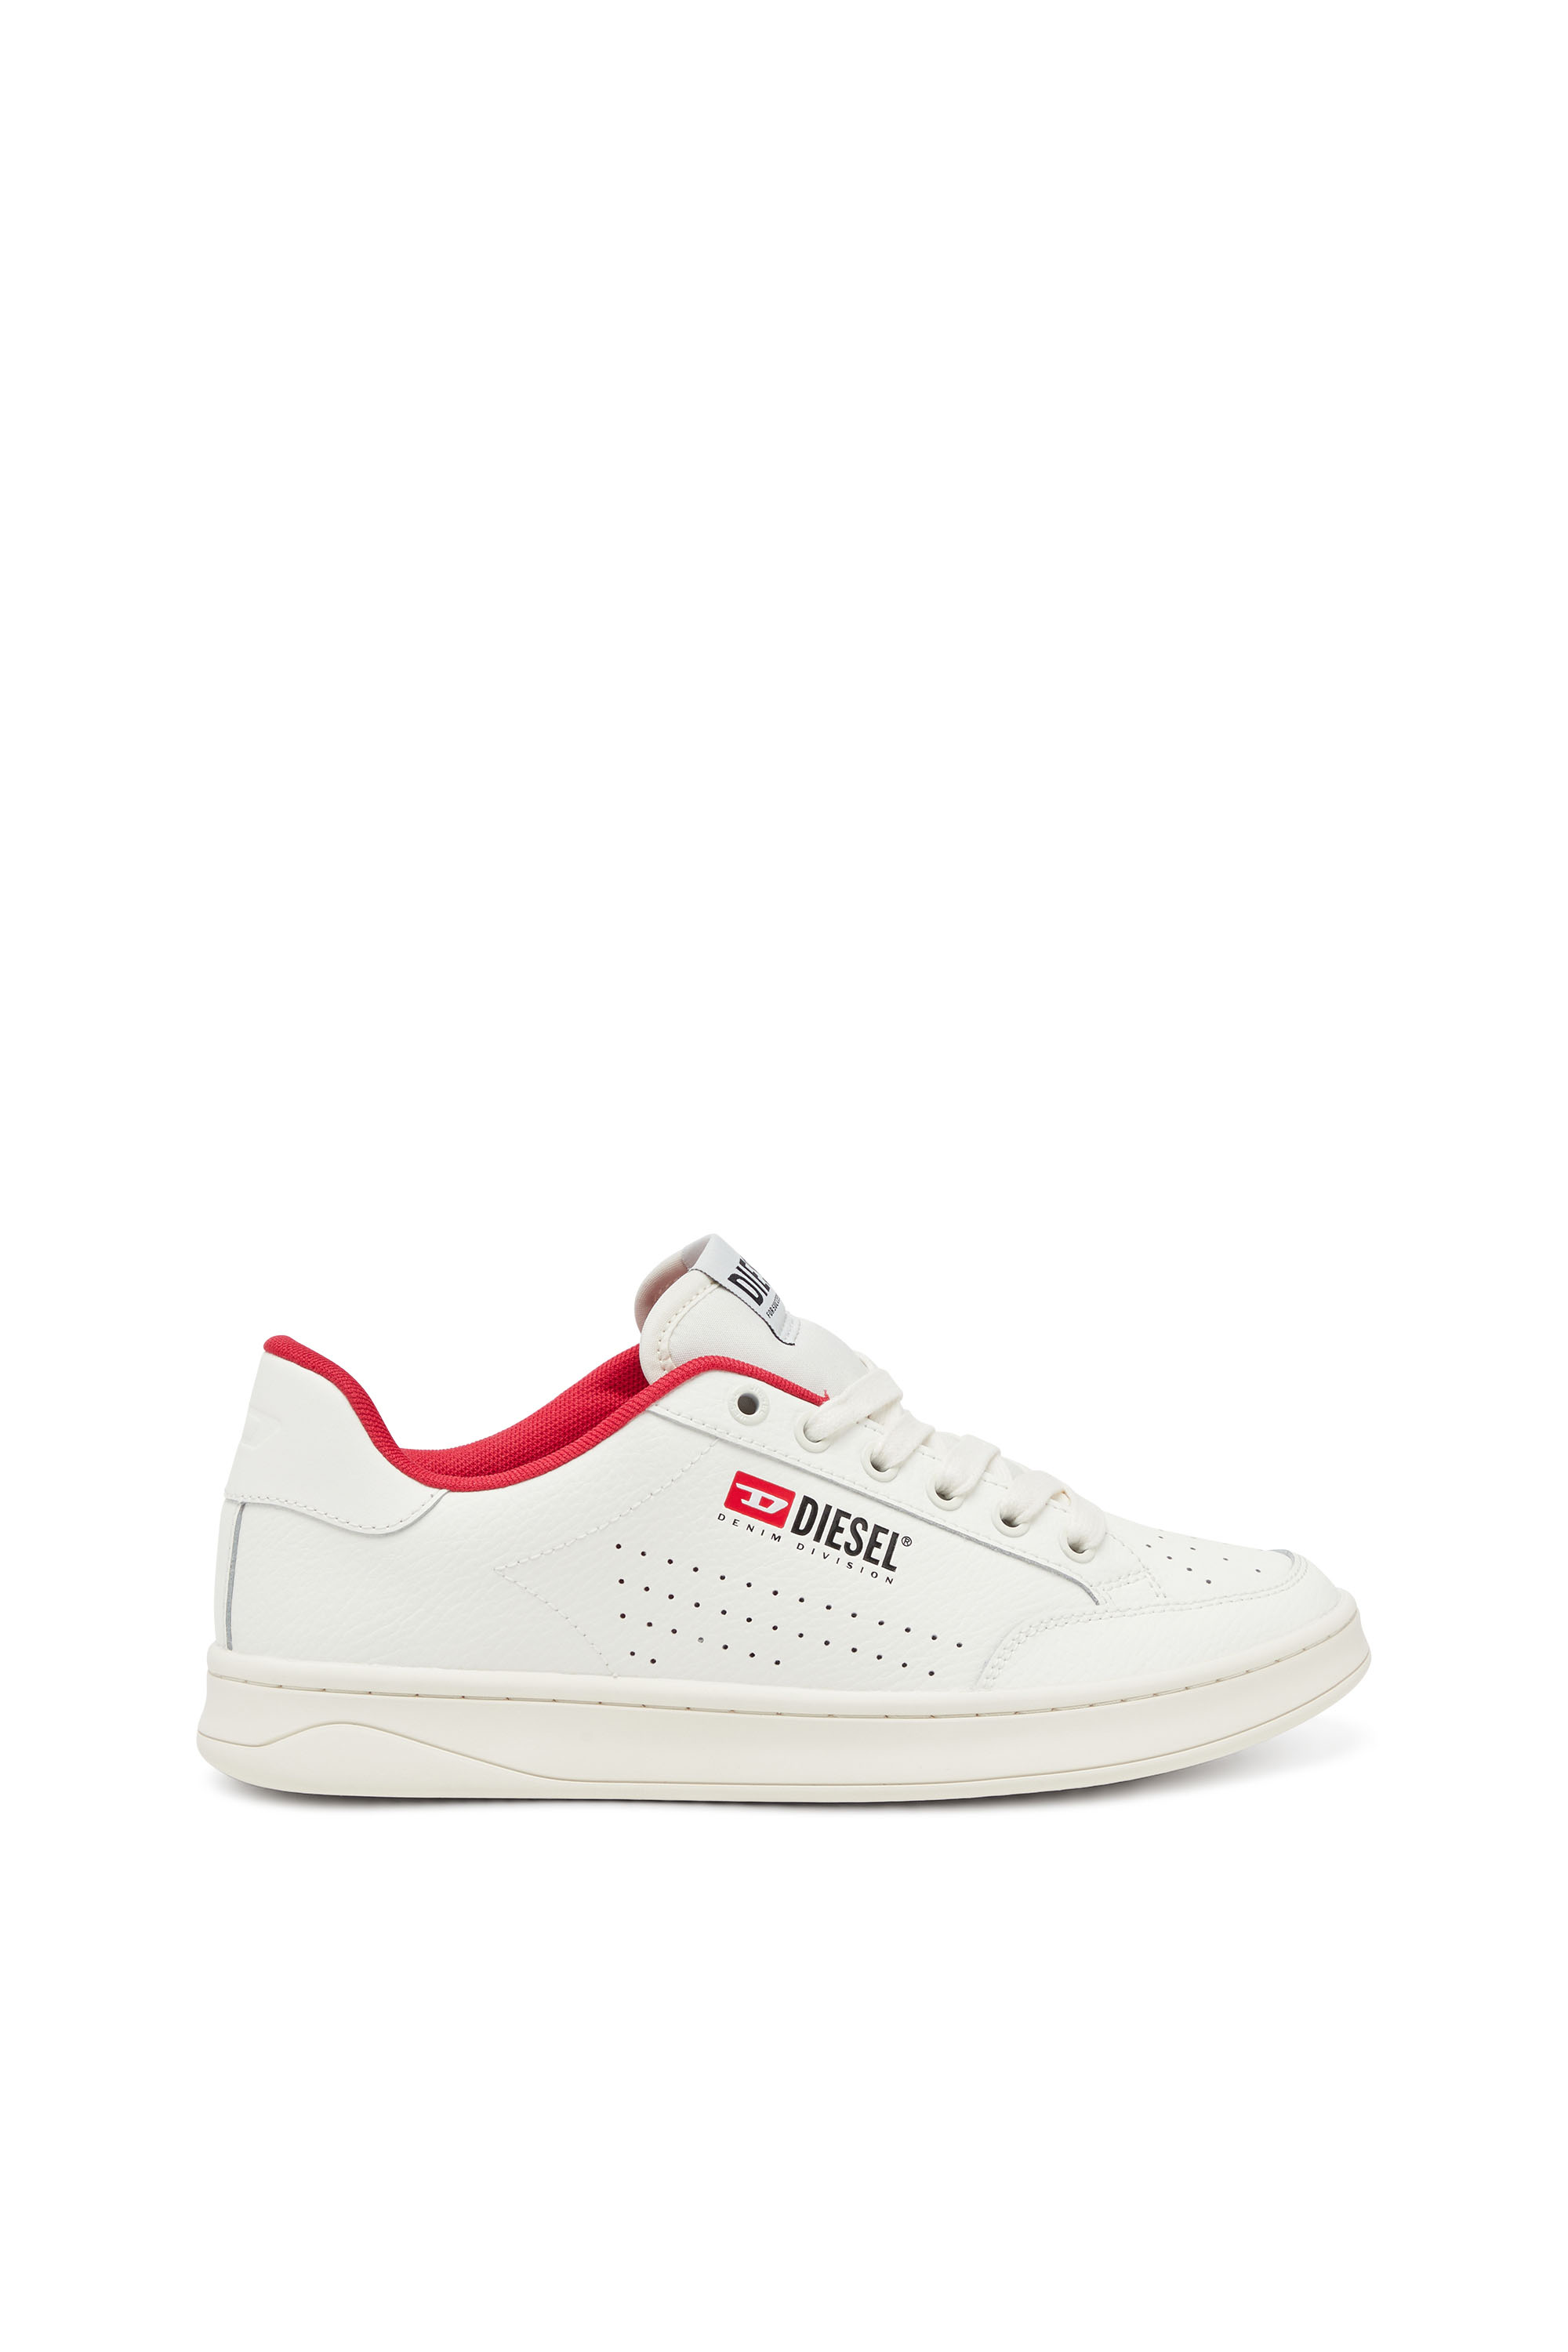 Diesel - S-Athene Vtg - Retro sneakers in perforated leather - Sneakers - Man - Multicolor